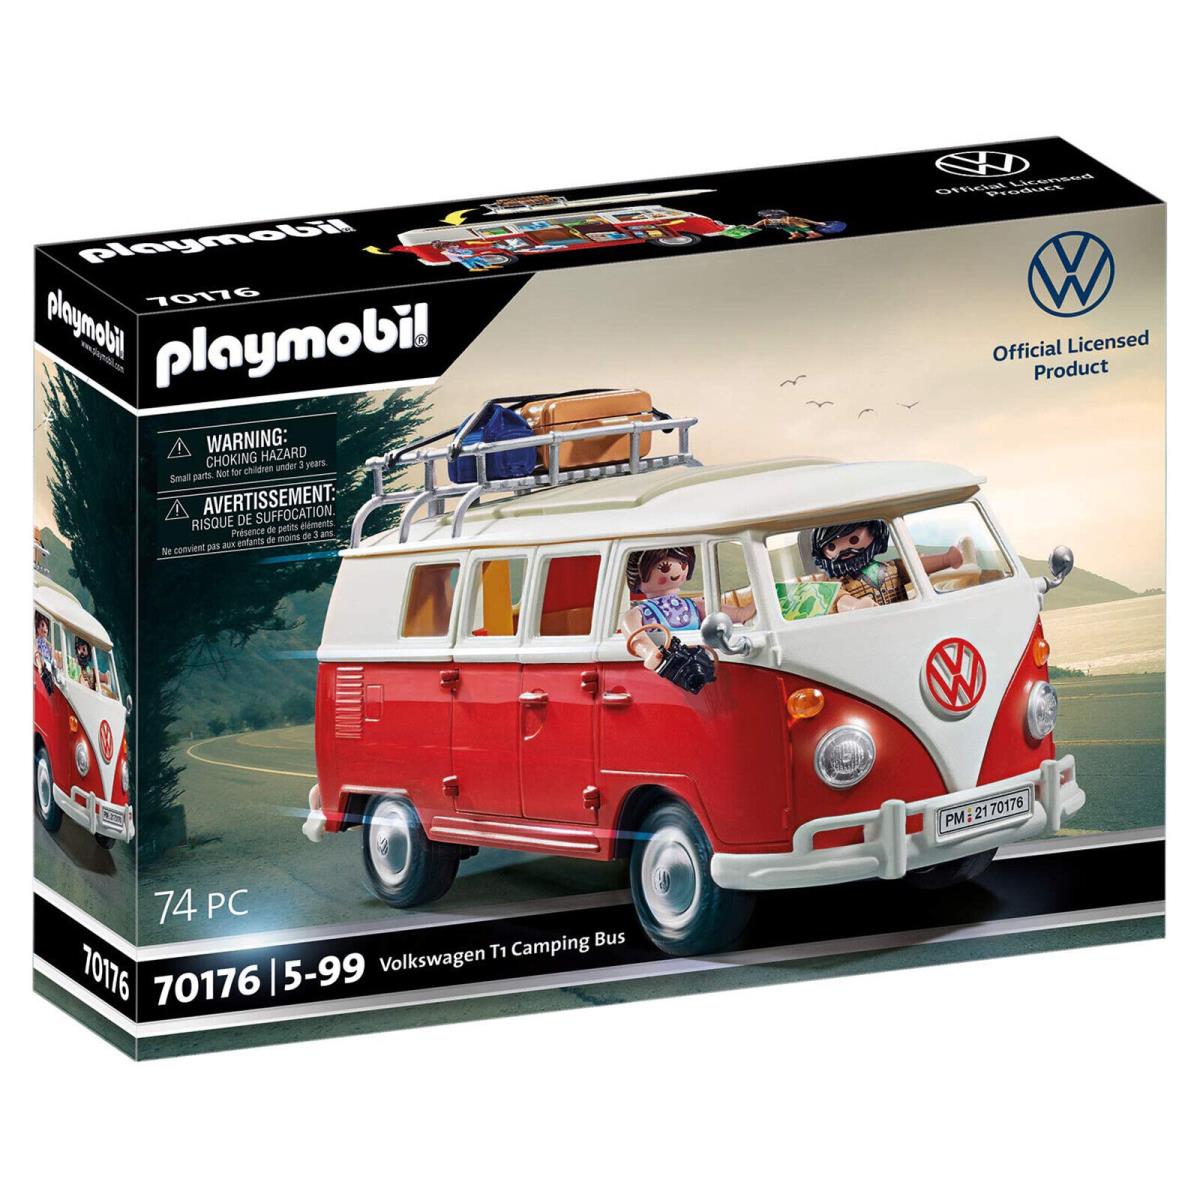 Playmobil Volkswagon T1 Camping Bus Building Set 70176 Learning Toys